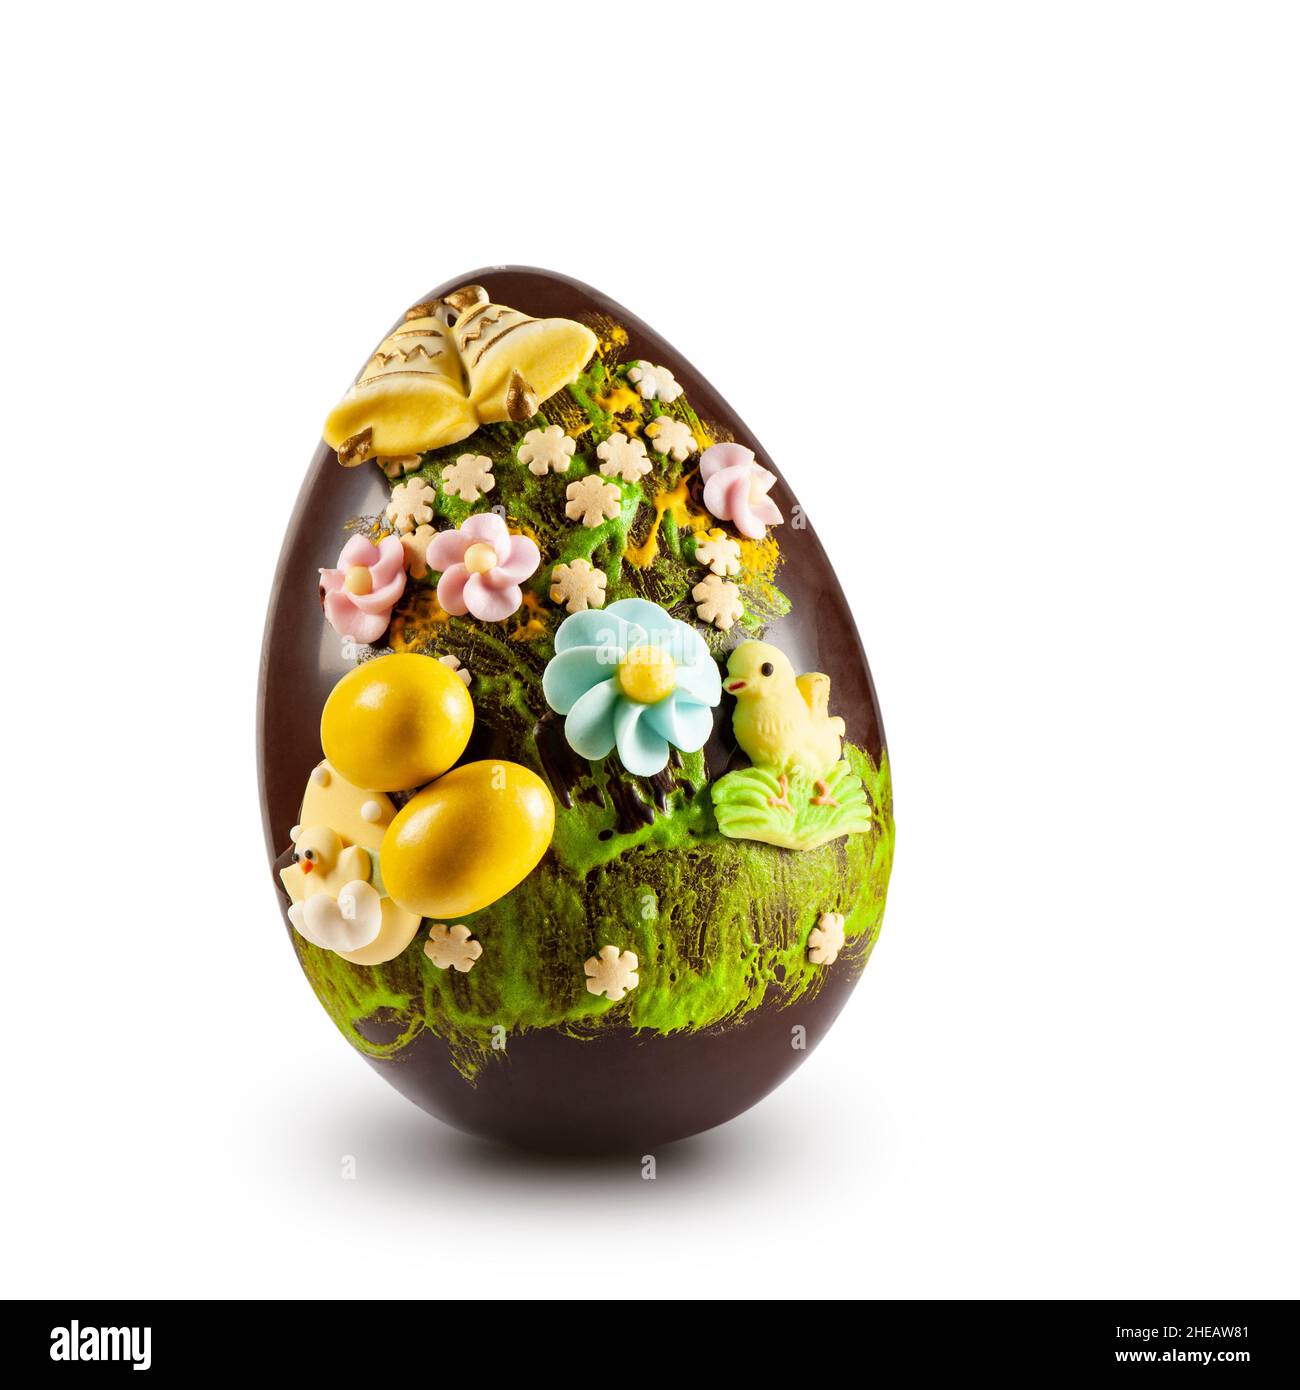 Chocolate easter egg with decorations on white background Stock Photo